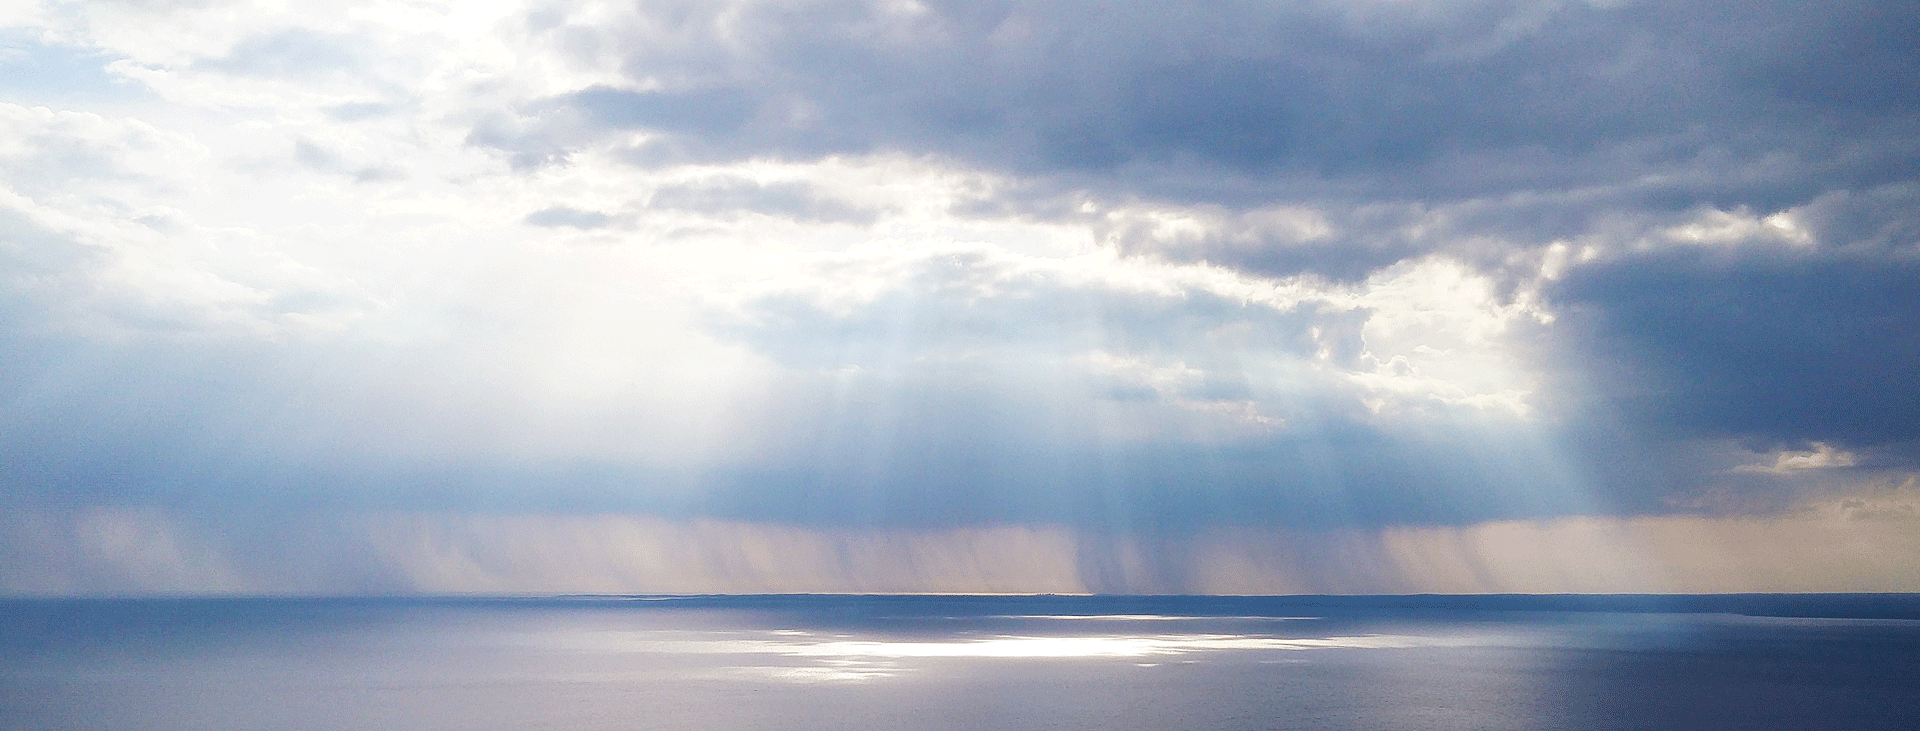 Cloudy sky with light streaming through to touch water